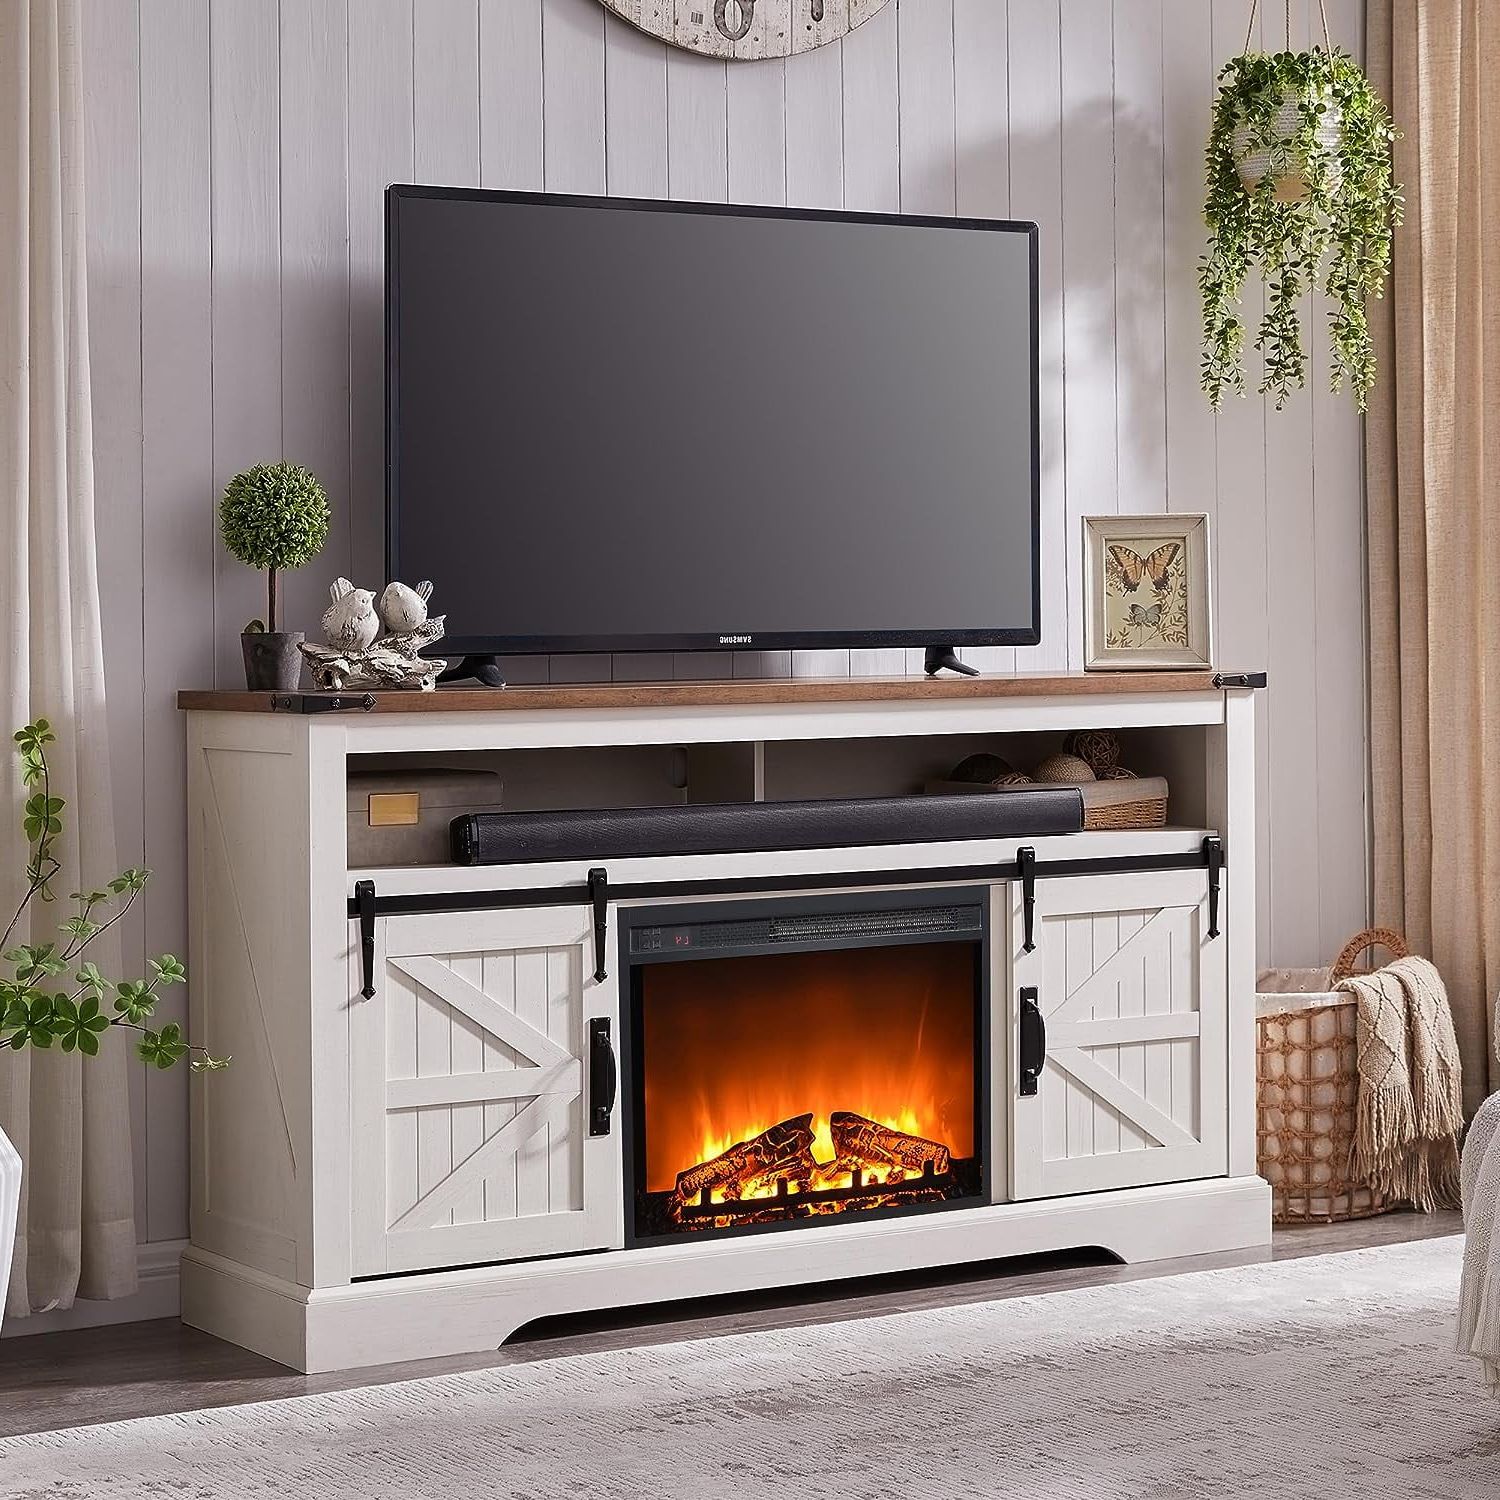 Okd Farmhouse 60" Electric Fireplace Tv Stand For Tvs Up To 65", Large Entertainment  Center With Fireplace For Living Room, Bedroom, Antique White – Walmart Throughout Tv Stands With Electric Fireplace (View 9 of 20)